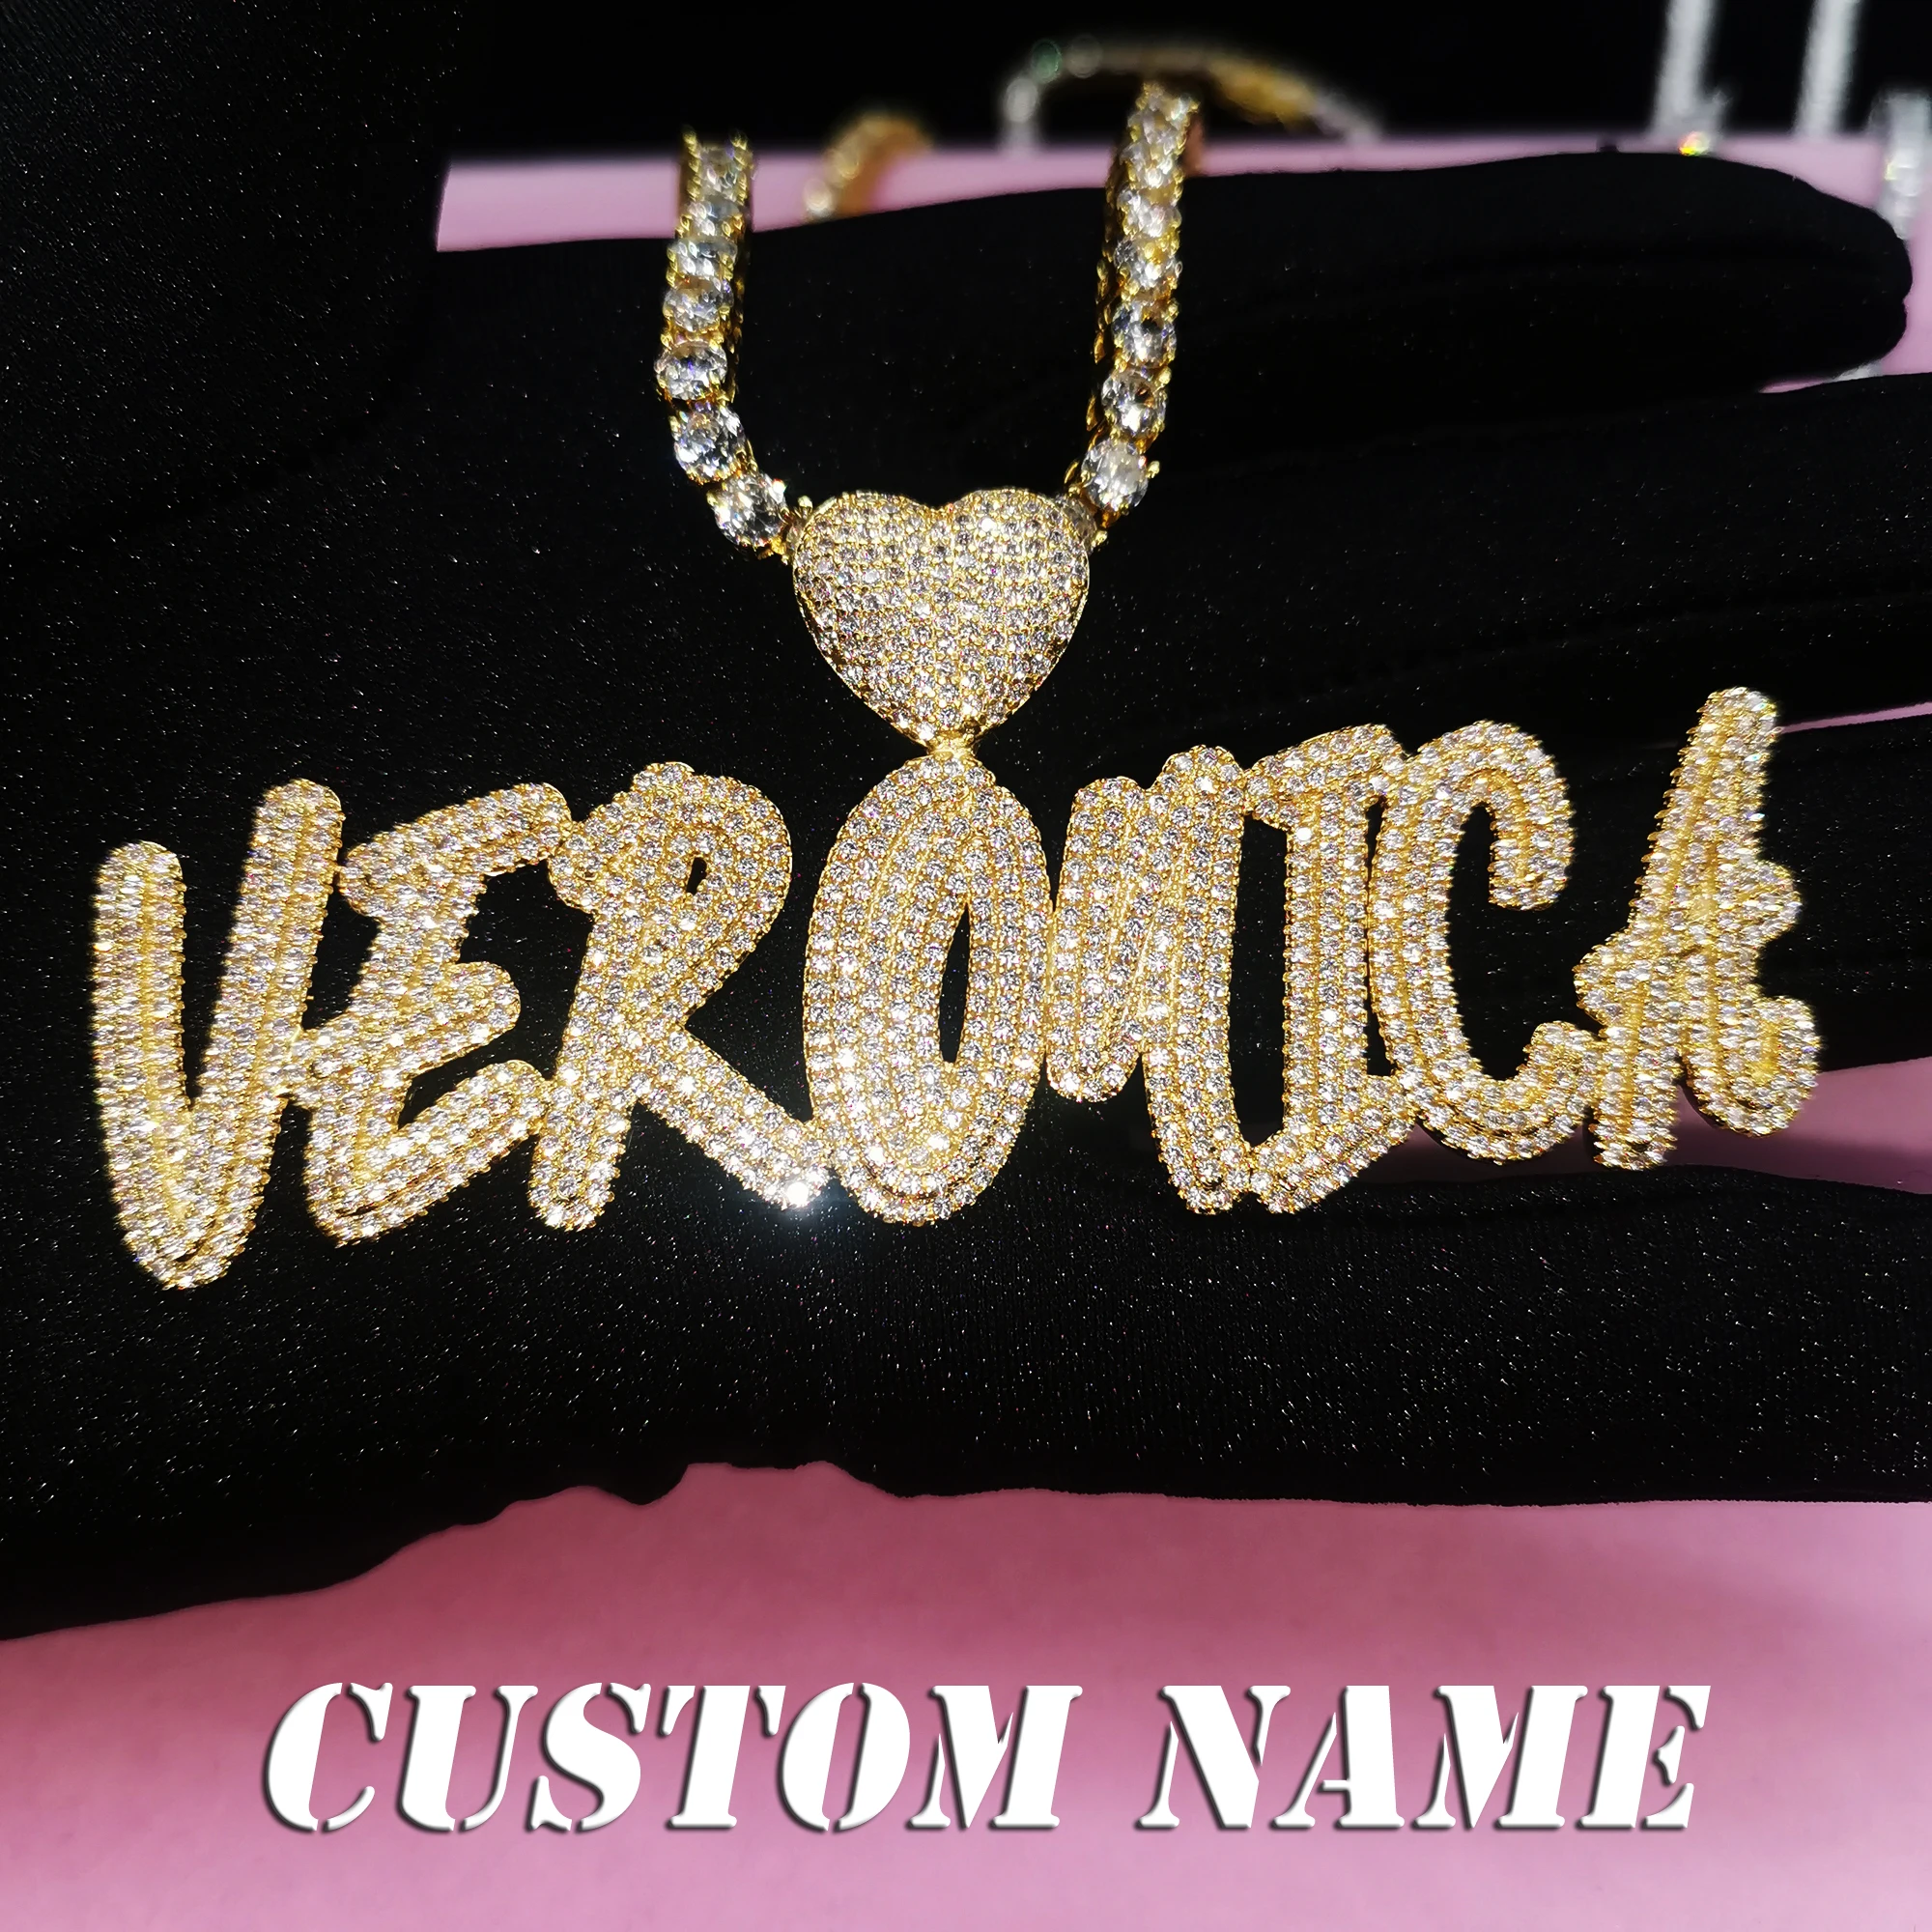 Personalized Cursive Name Necklace With Tennis Chain Custom Double-Layer Heart Bail Letters Pendant Gift For Her Birthday Gifts